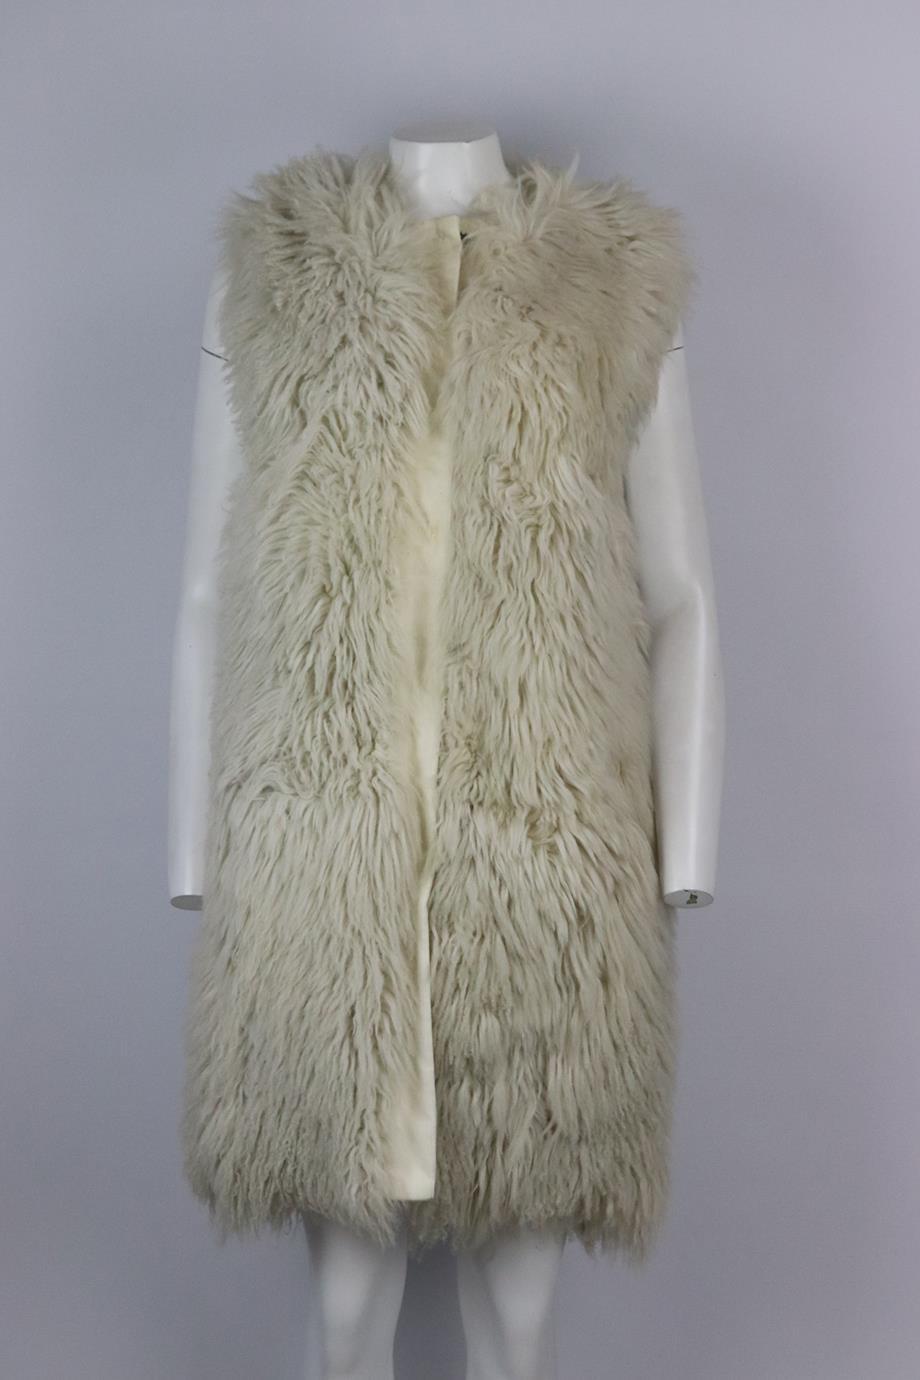 Dolce & Gabbana corduroy trimmed shearling gilet. Ecru. Sleeveless, crewneck. Snap button fastening at front. 100% Leather. Size: IT 40 (UK 8, US 4, FR 36). Bust: 40 in. Waist: 41 in. Hips: 42 in. Length: 38 in. Fair condition - Discoloured